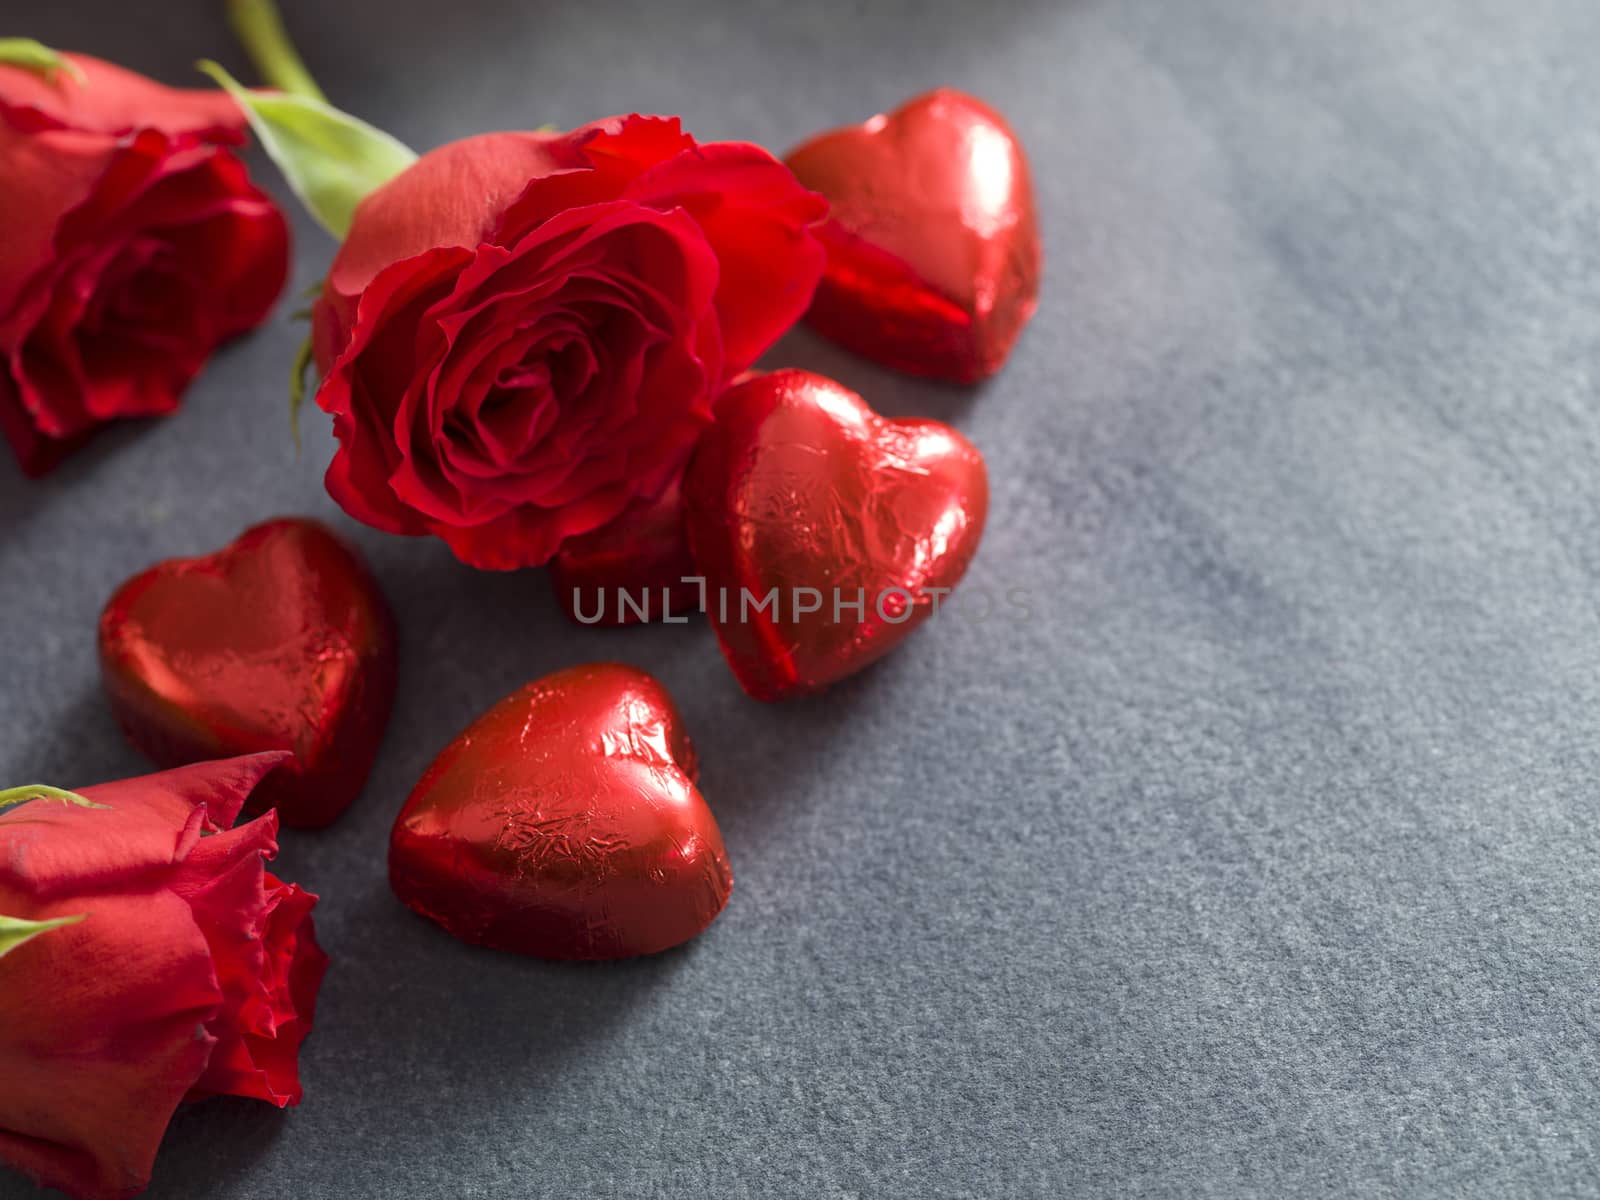 Chocolate hearts and red roses on a grey background by janssenkruseproductions